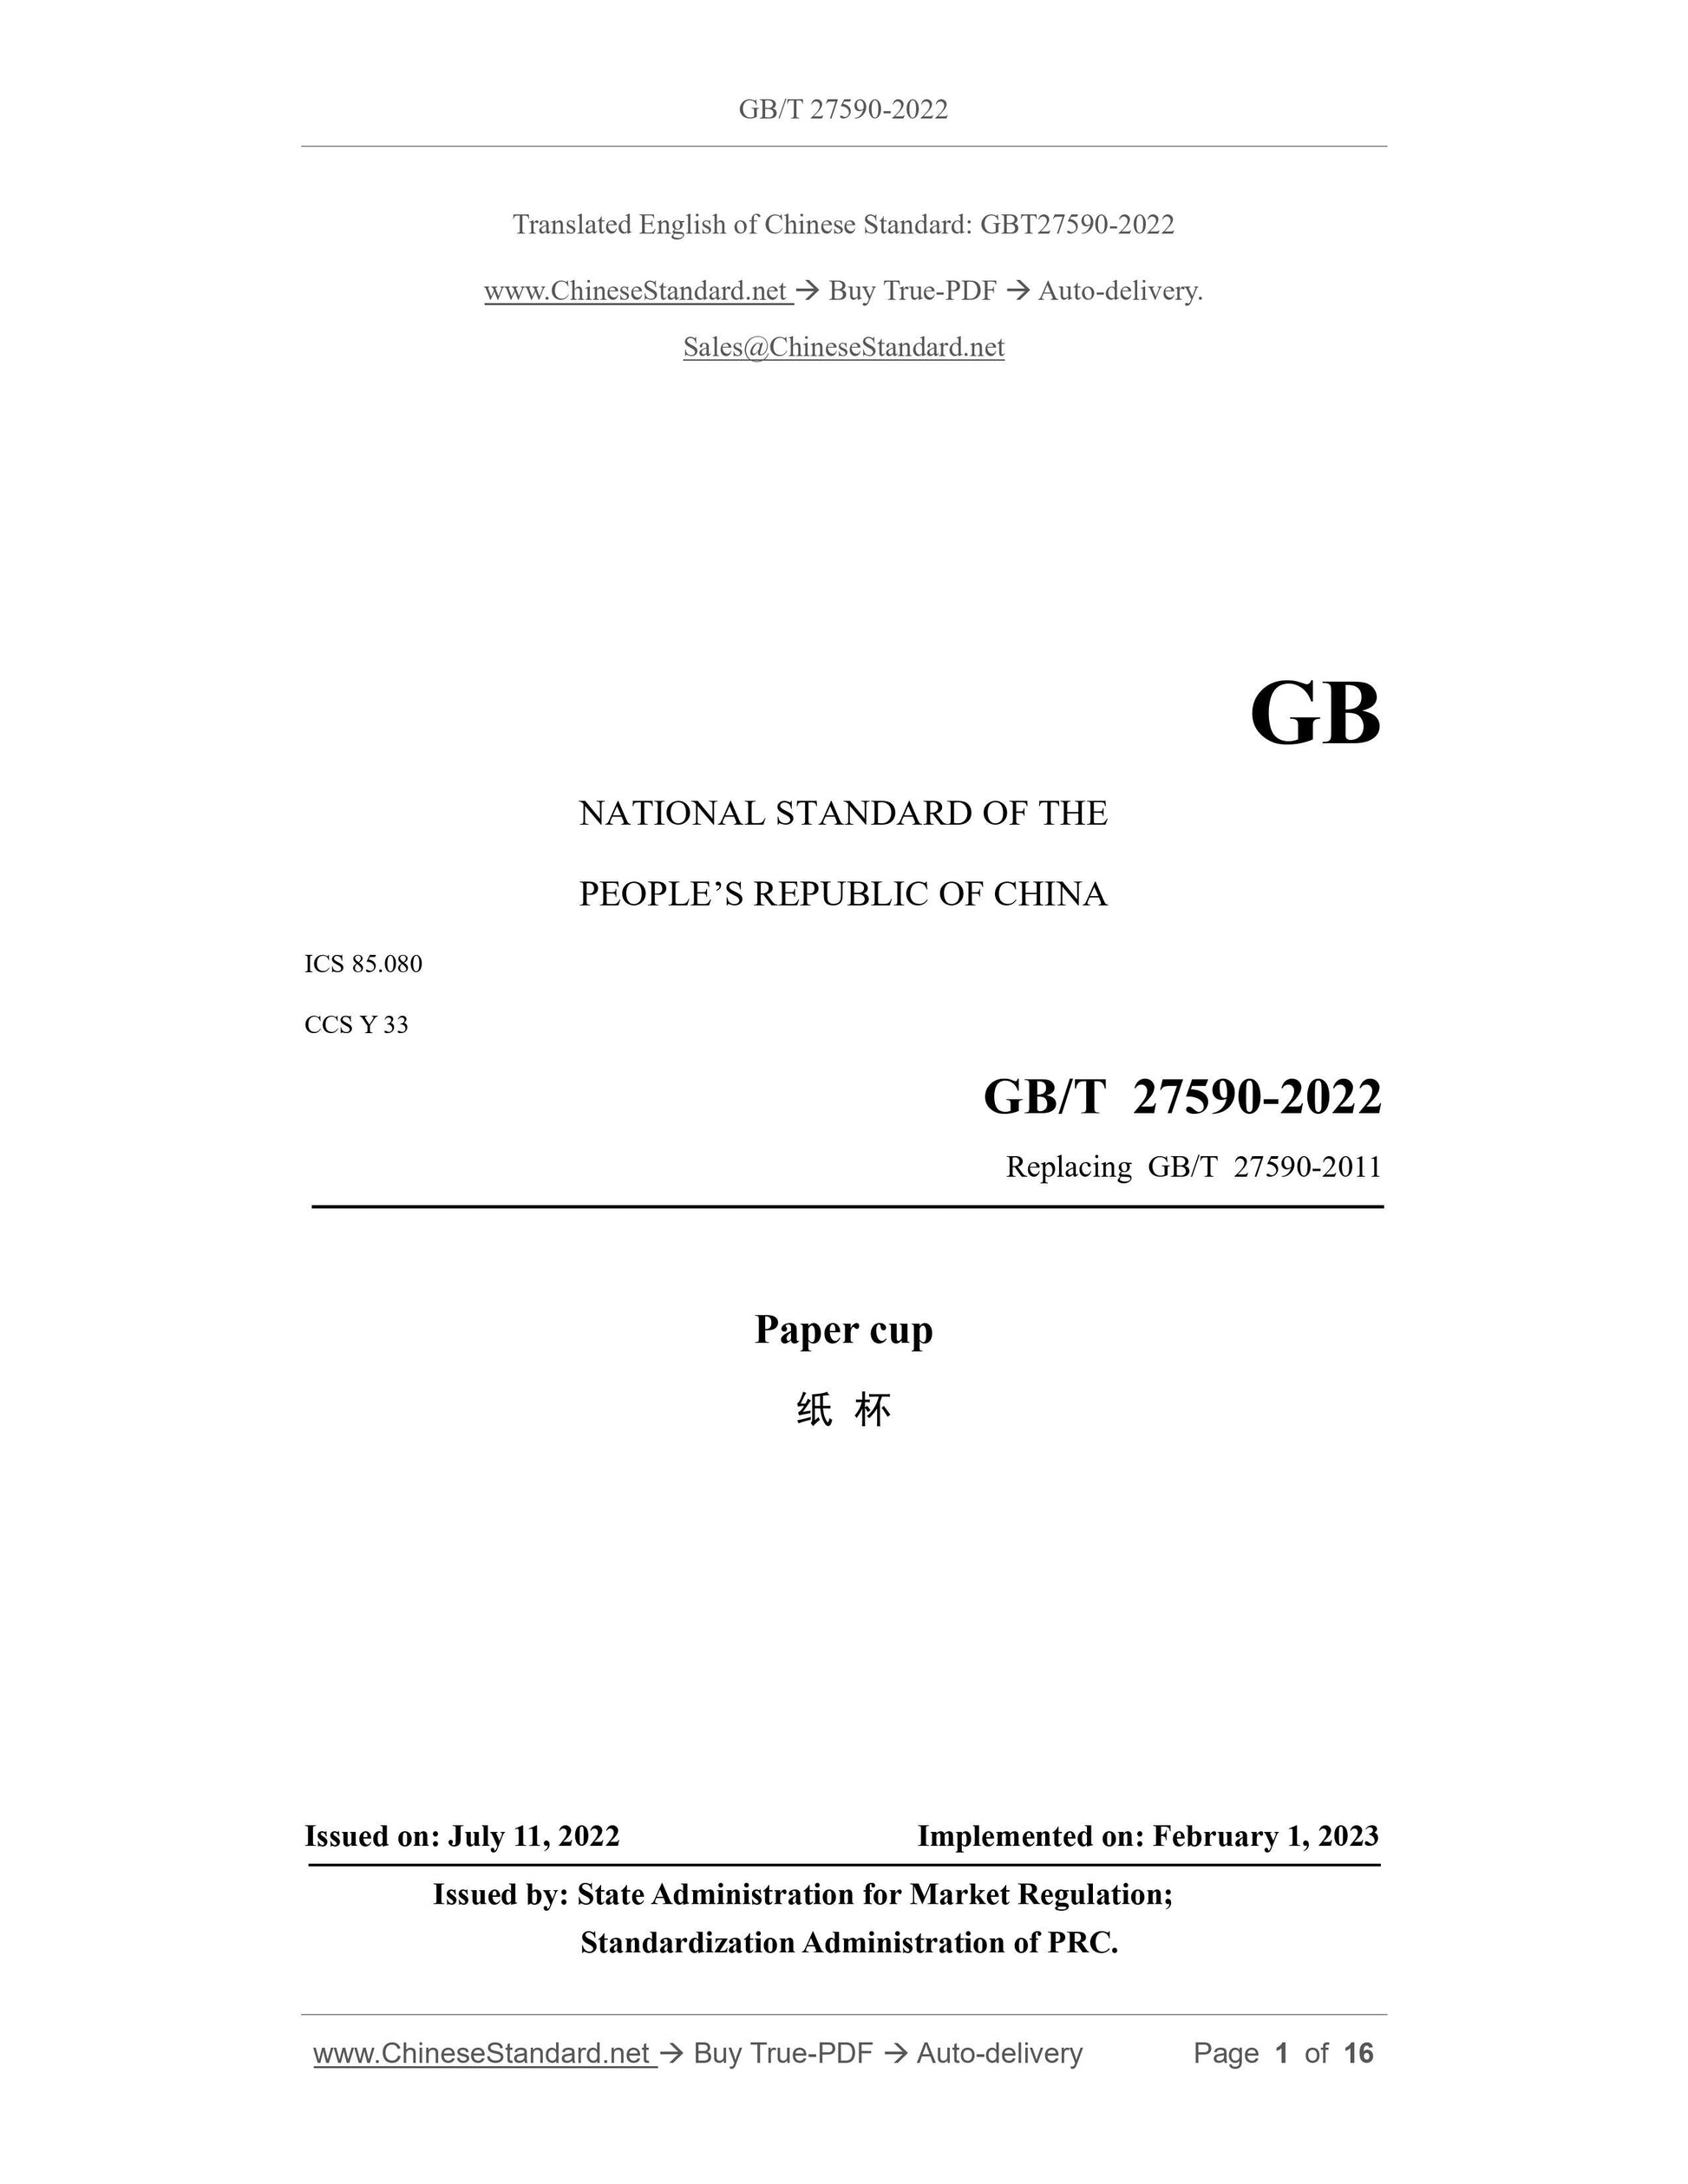 GB/T 27590-2022 Page 1